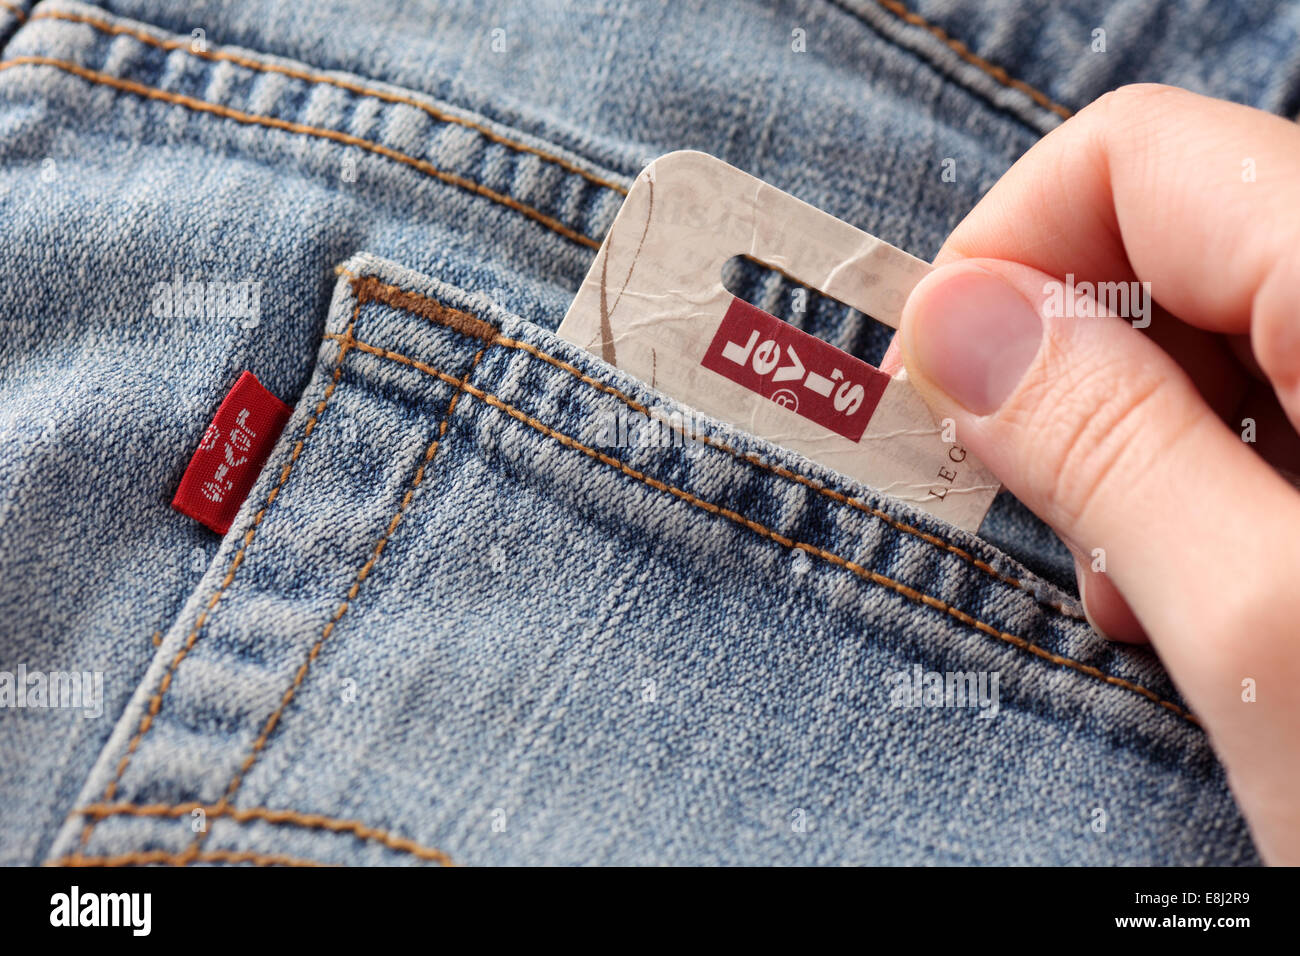 Tambov, Russian Federation - October 21, 2012: Woman's hand taking out label logo  from pocket of a pair Levi's Jeans. Stock Photo